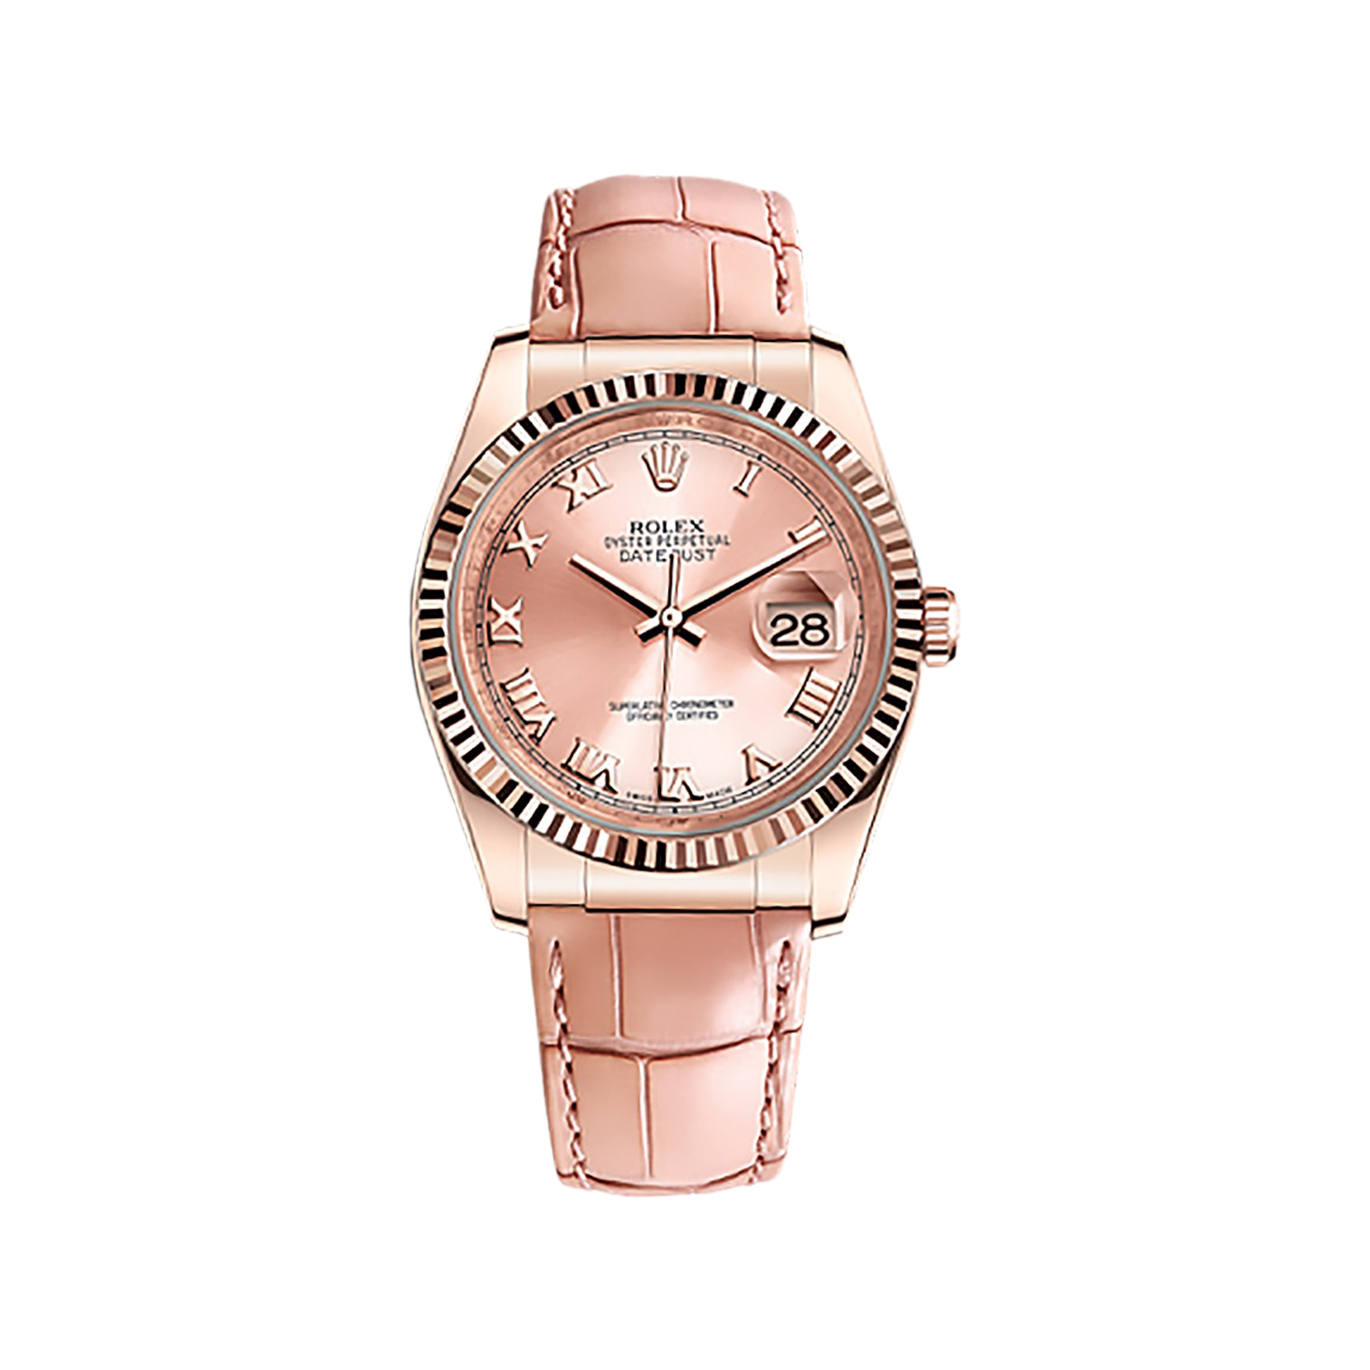 Datejust 36 116135 Rose Gold Watch (Pink) - Click Image to Close